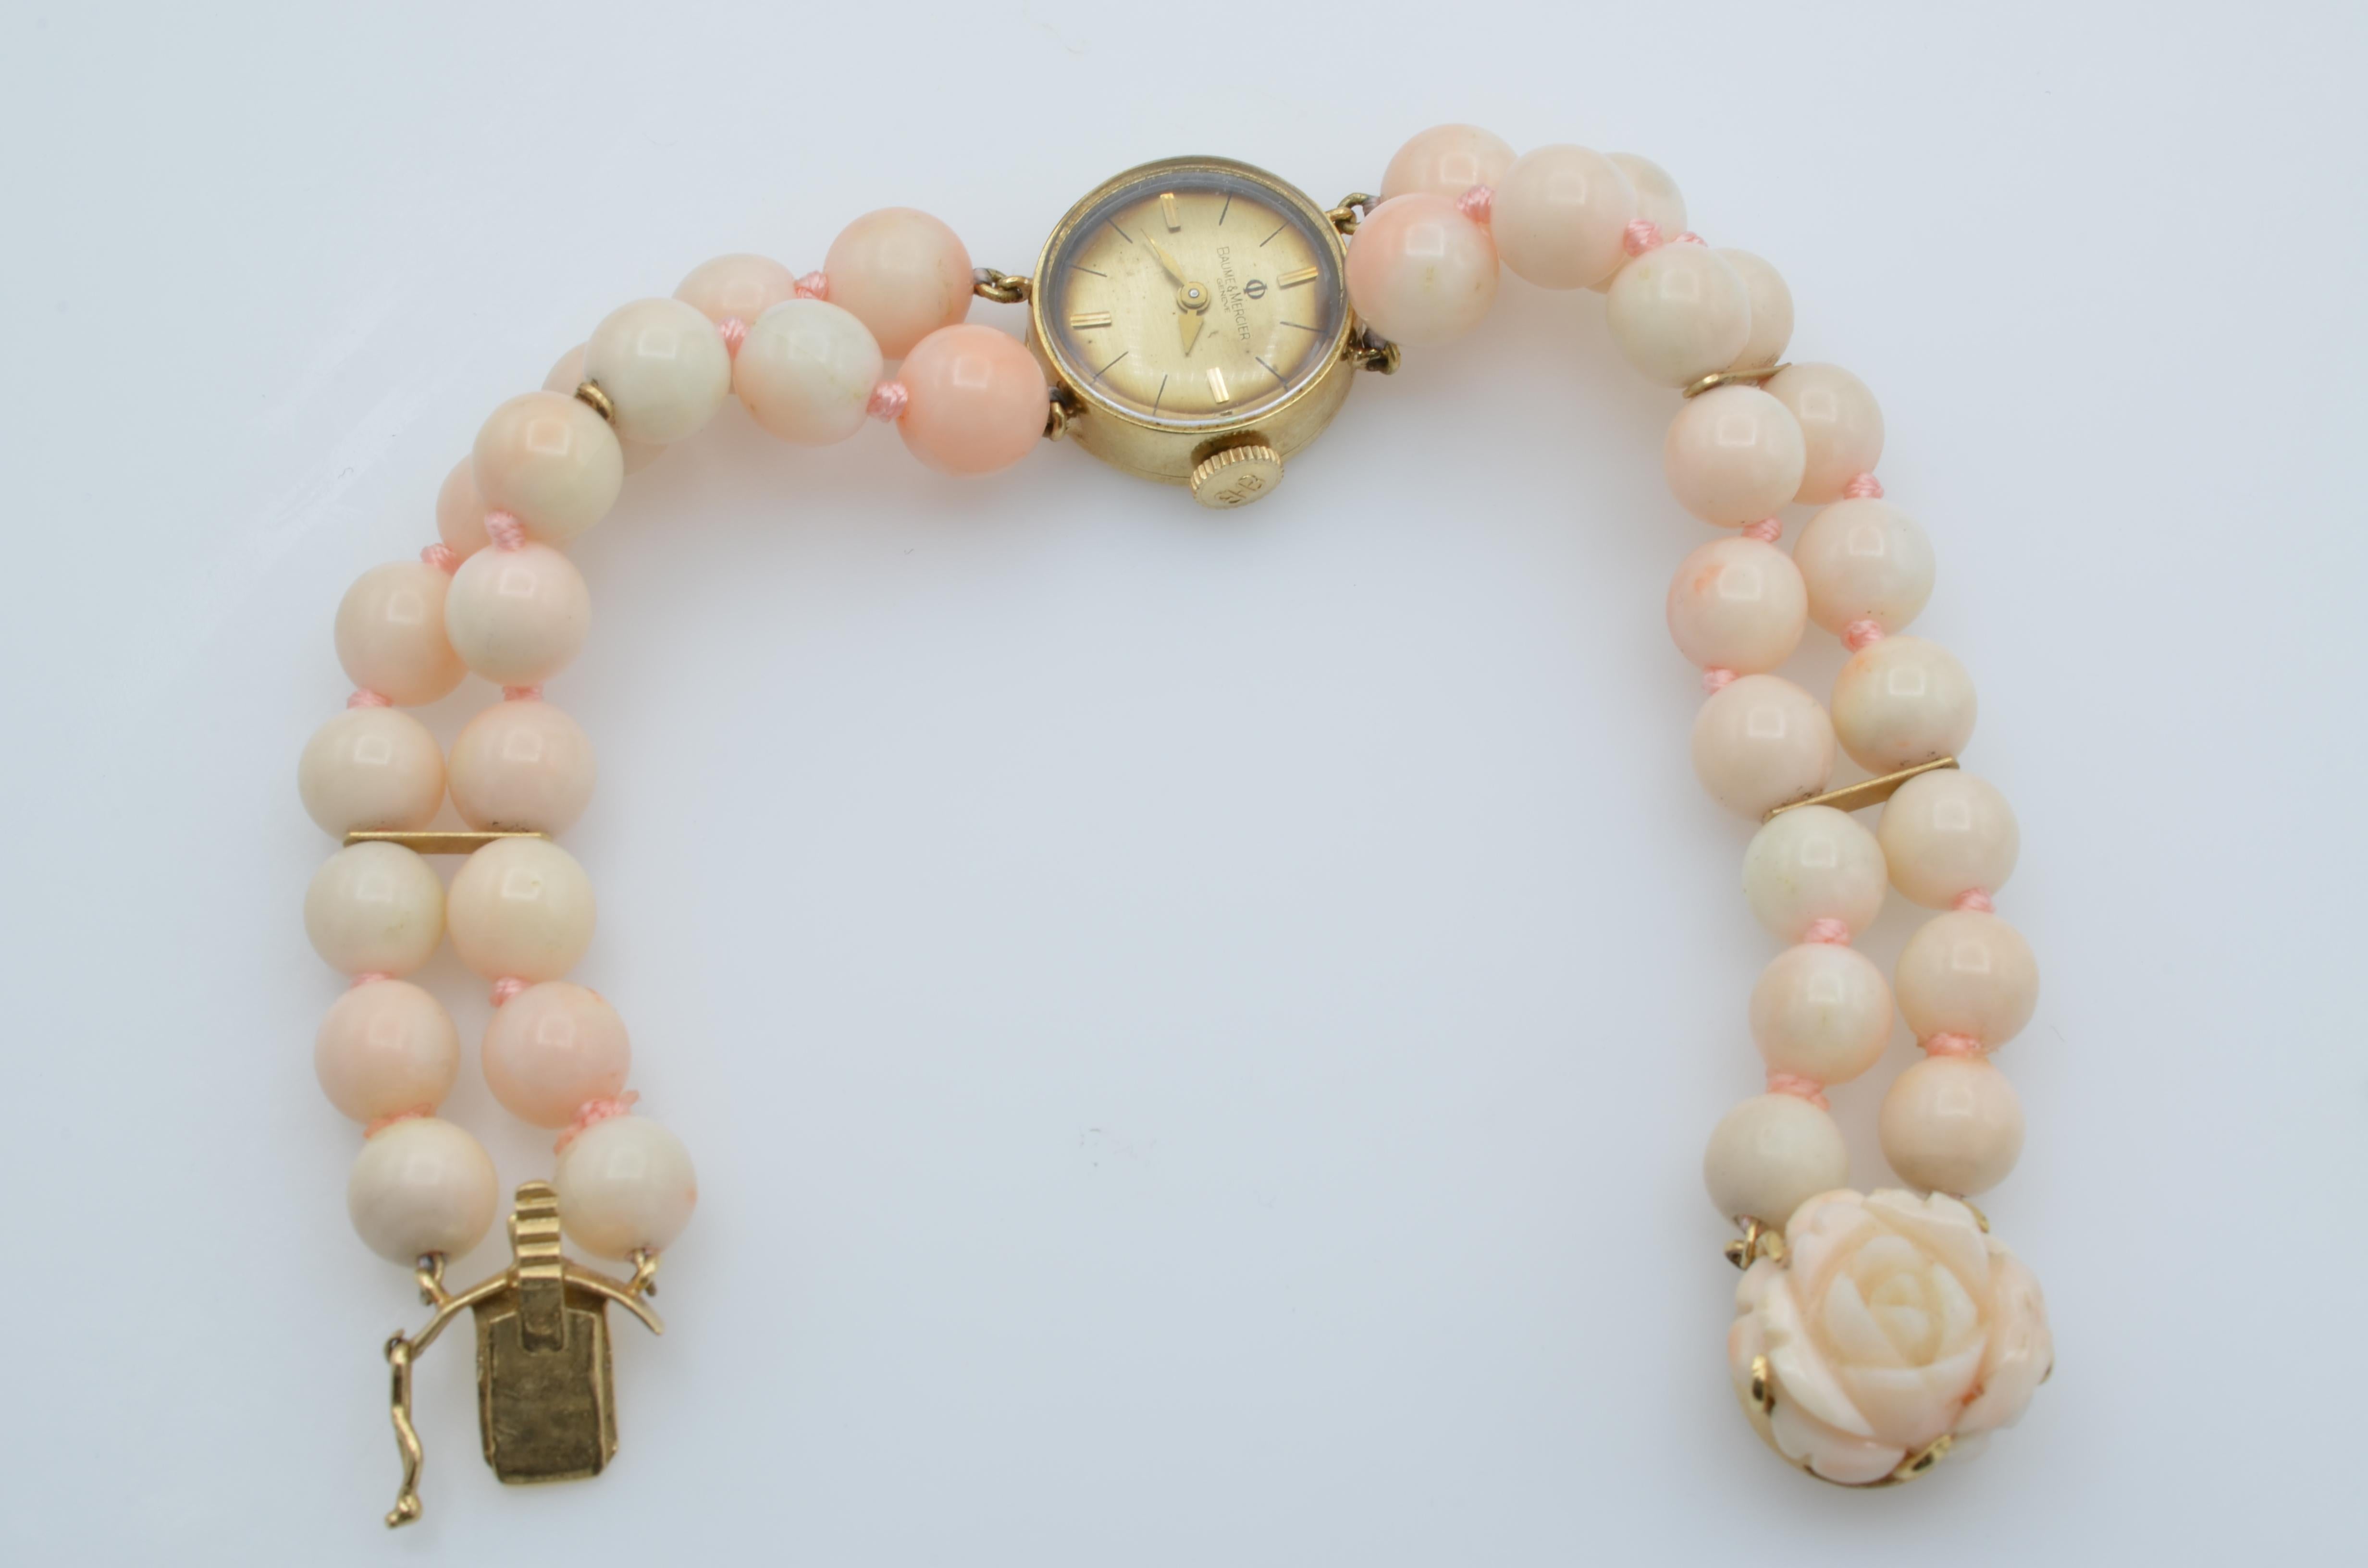 This lovely Baume et Mercier woman wrist watch mechanic beads coral 14 karat gold bracelet is two strands of Angel Skin coral hand knotted into a watch, movement set in 14k gold case. The clasp is a carved coral floral design with a secure safety.